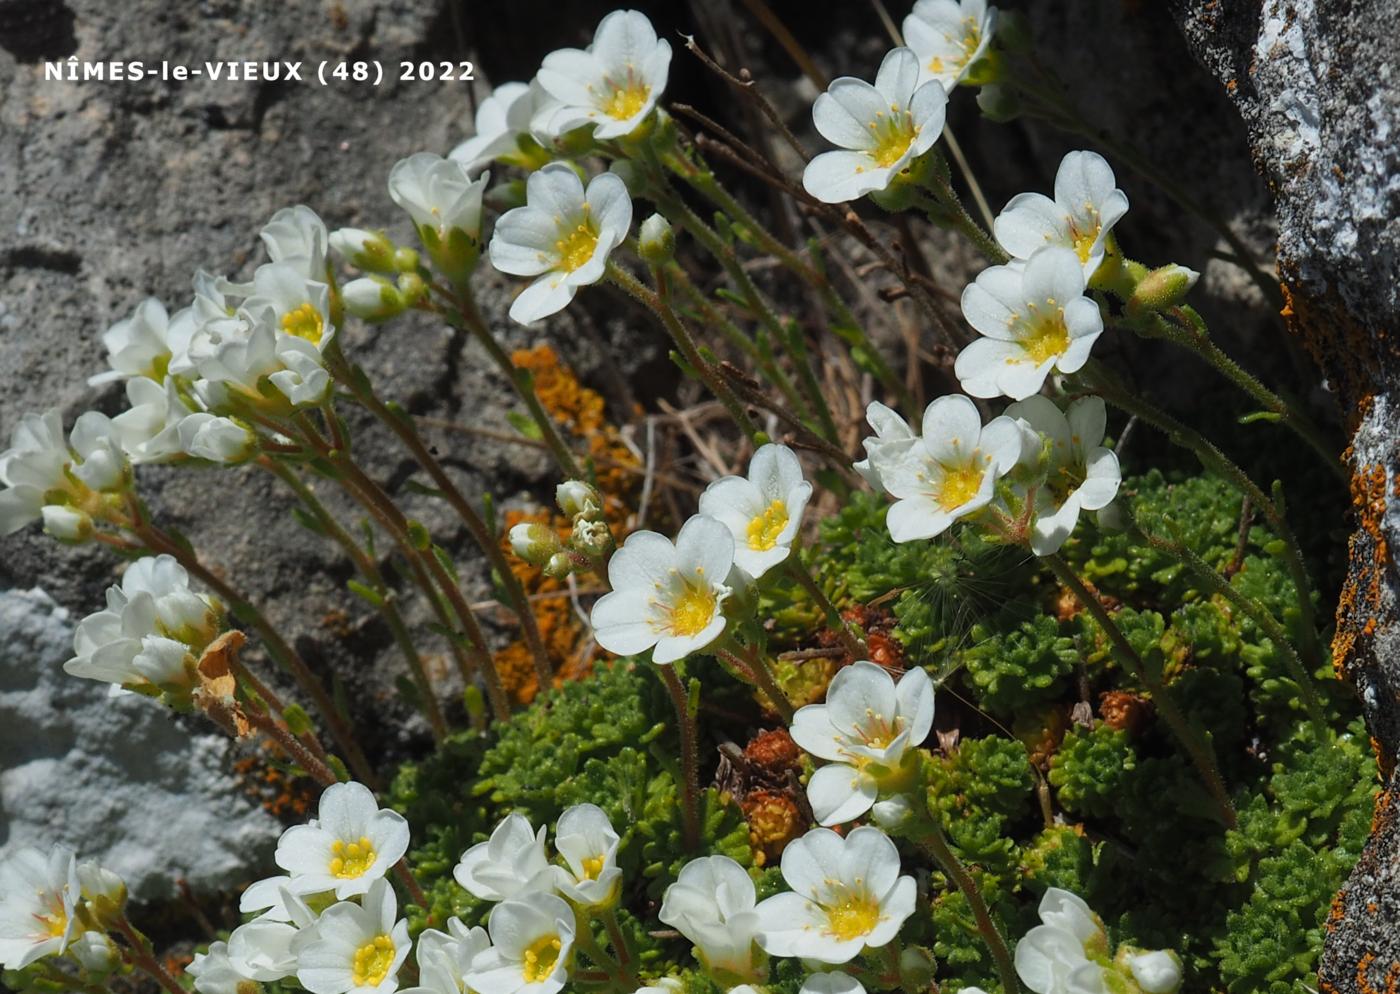 Saxifrage of the Cévennes flower